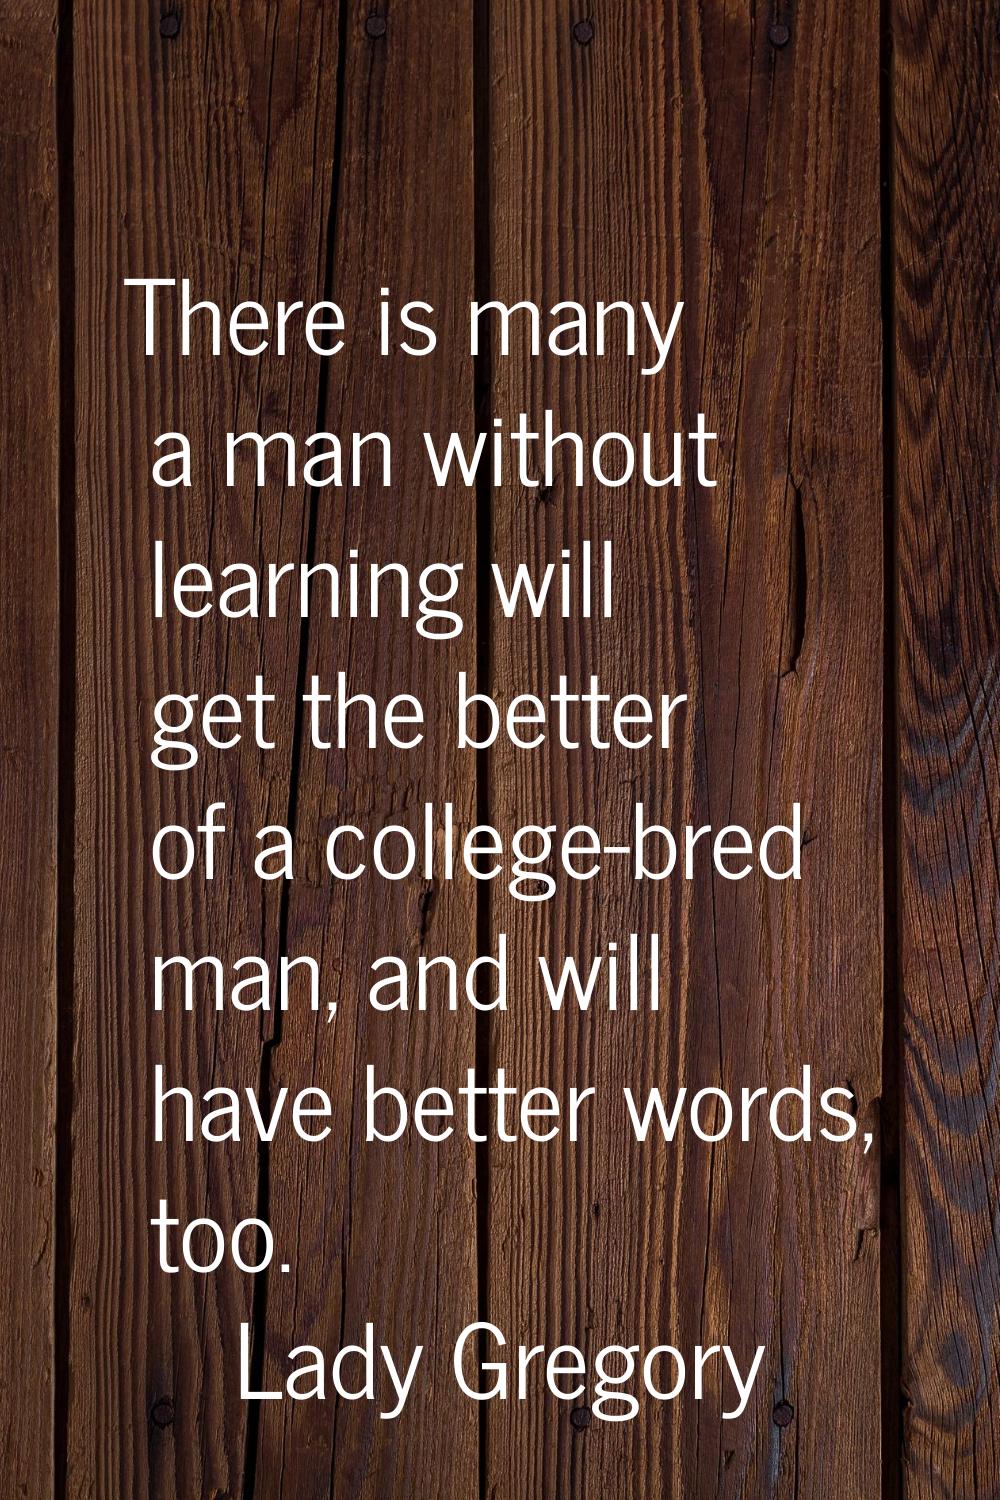 There is many a man without learning will get the better of a college-bred man, and will have bette